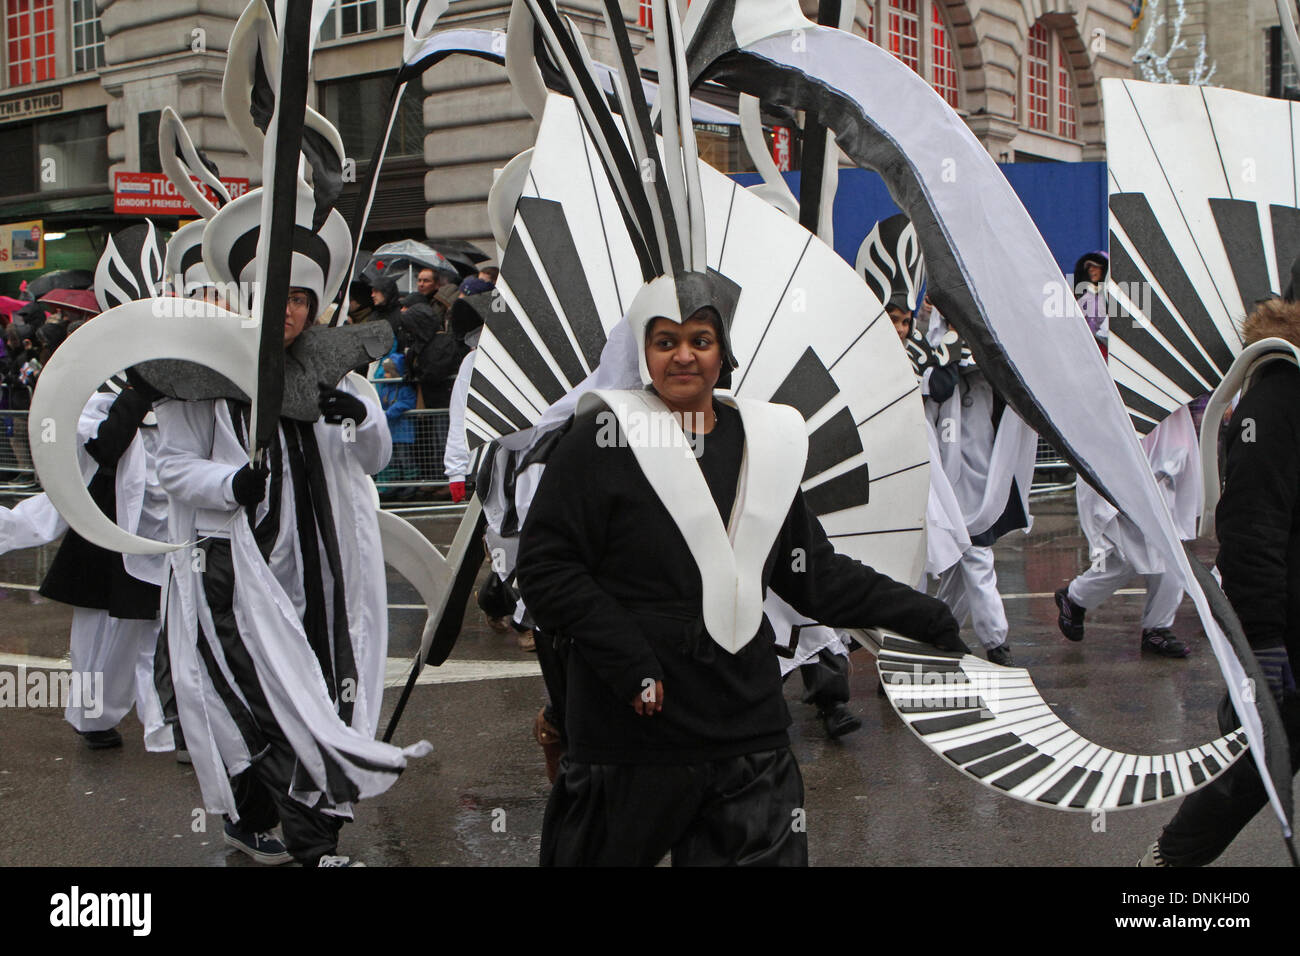 London,UK,1st January 2014,Piano costumes at the London's New Year's Day Parade 2014 Credit: Keith Larby/Alamy Live News Stock Photo